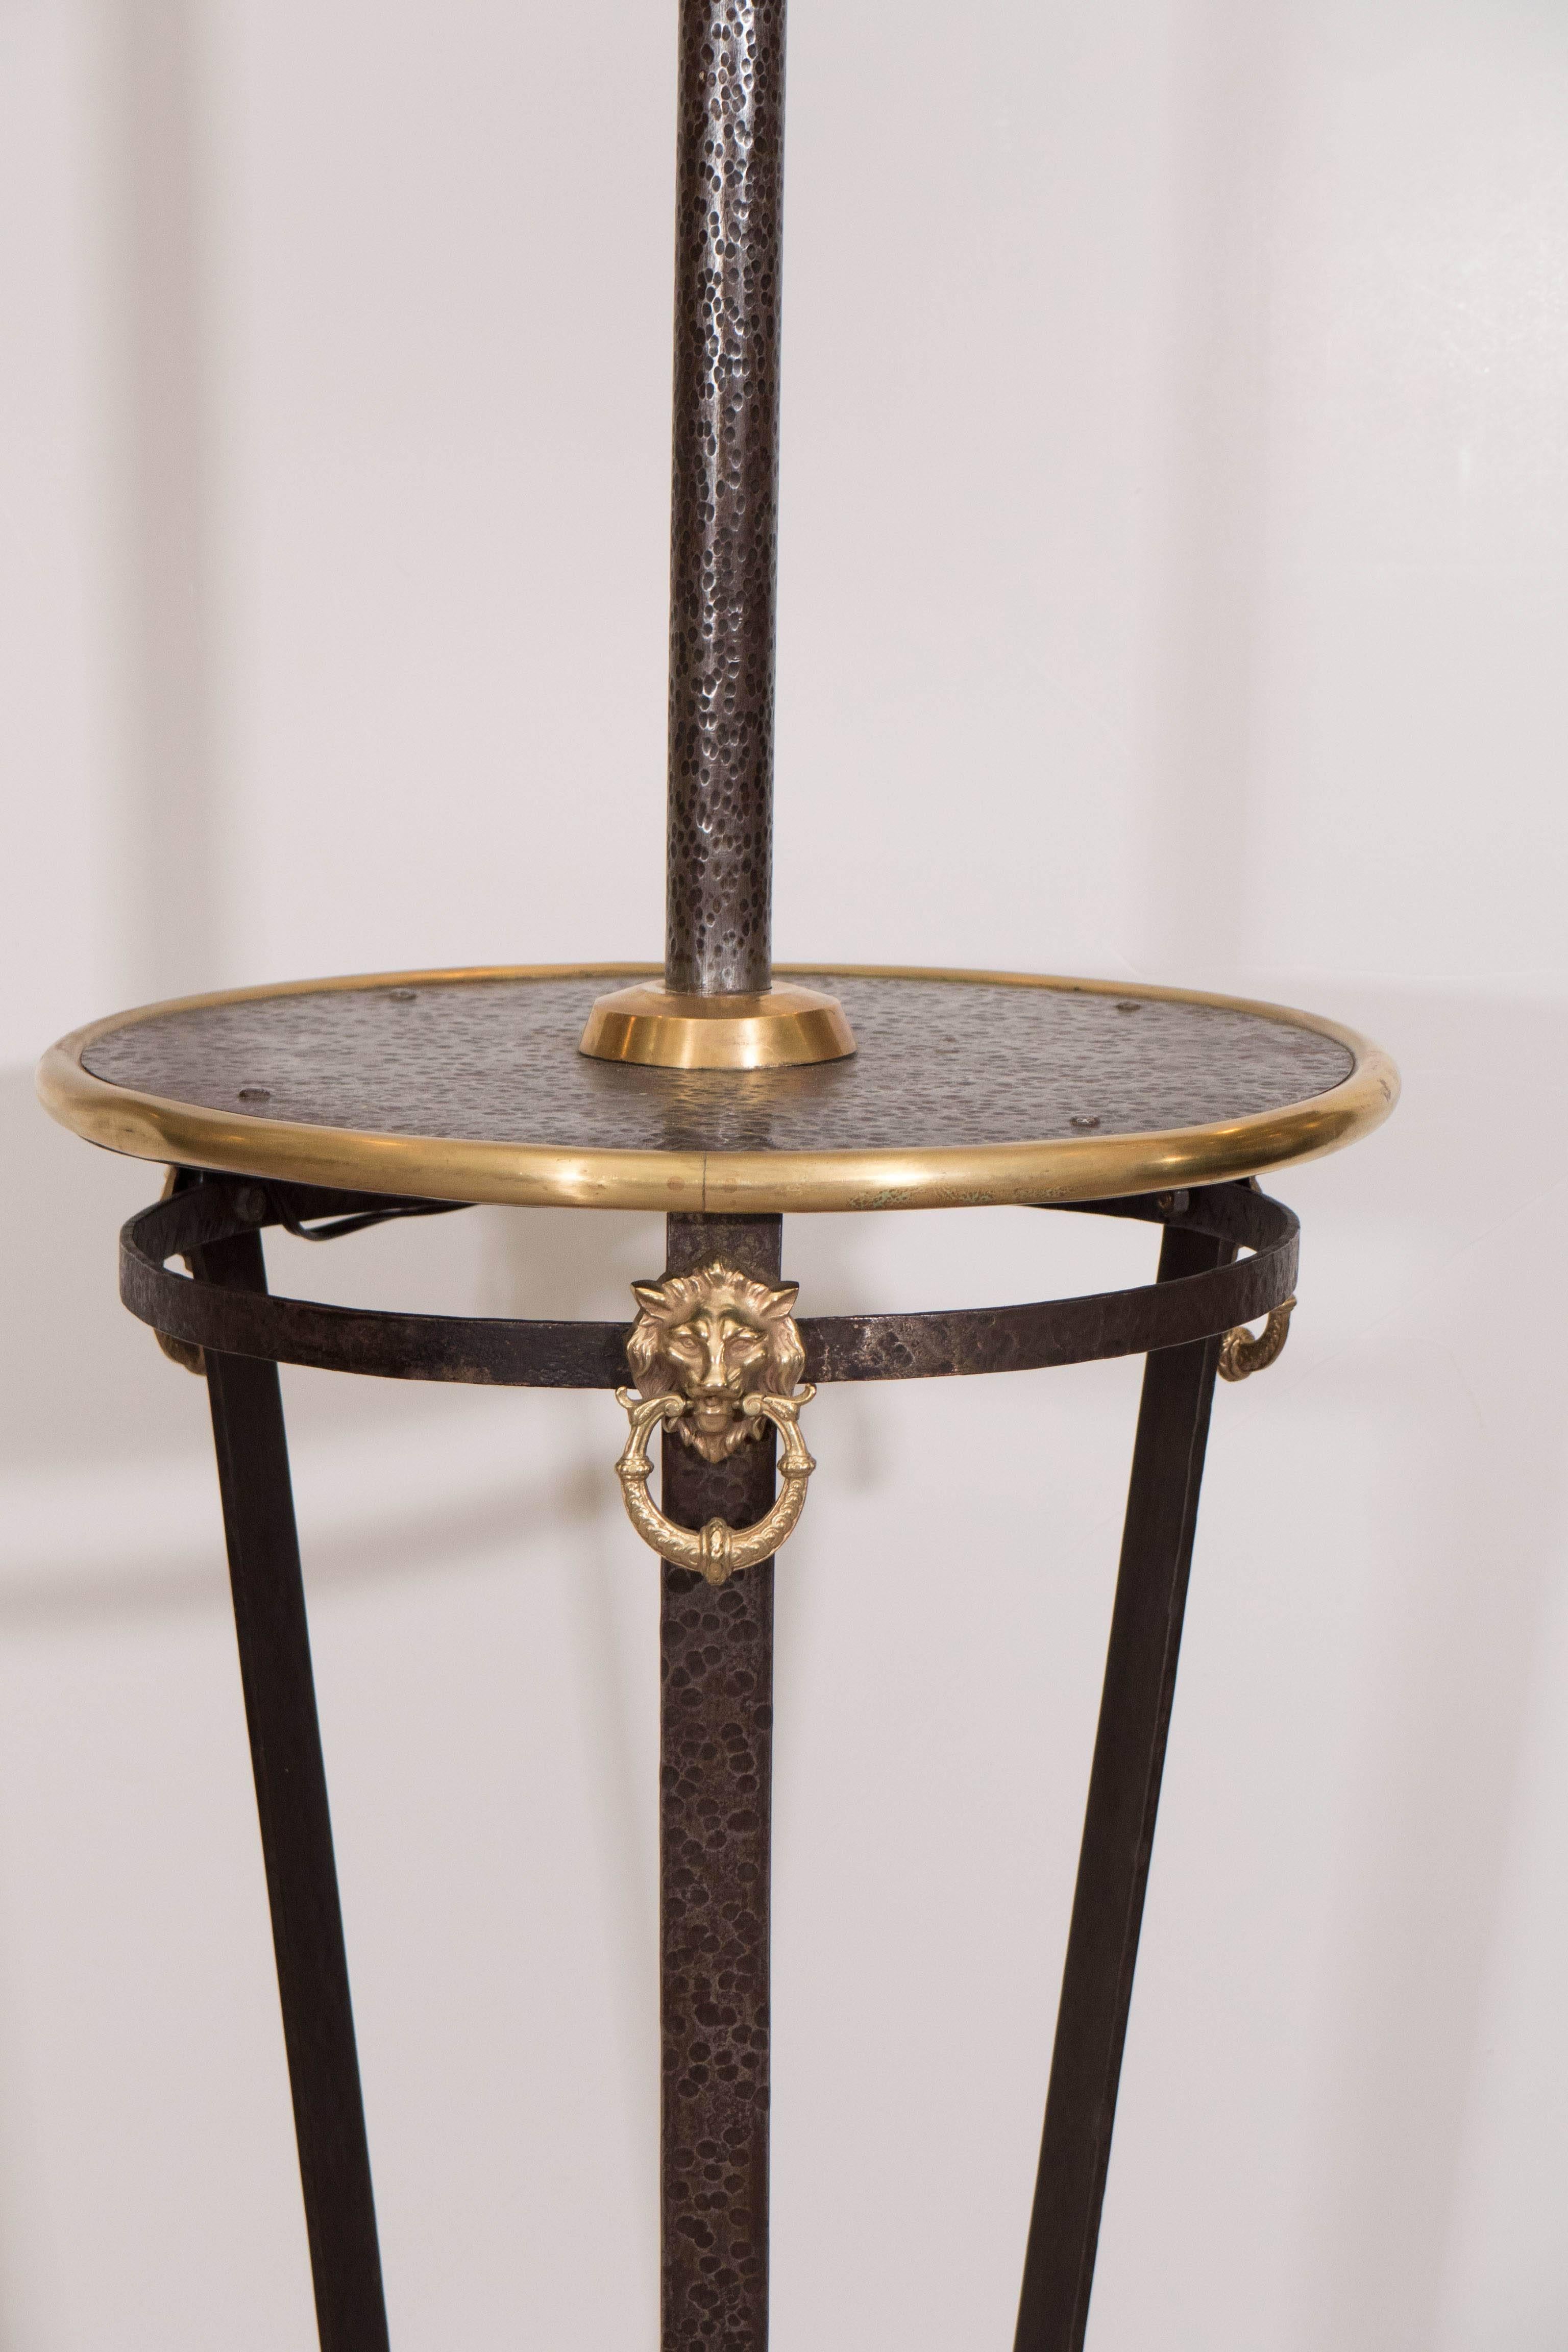 Arts and Crafts Art & Crafts Lamp Table in Hammered Iron with Brass Trim and Lion Heads Motif